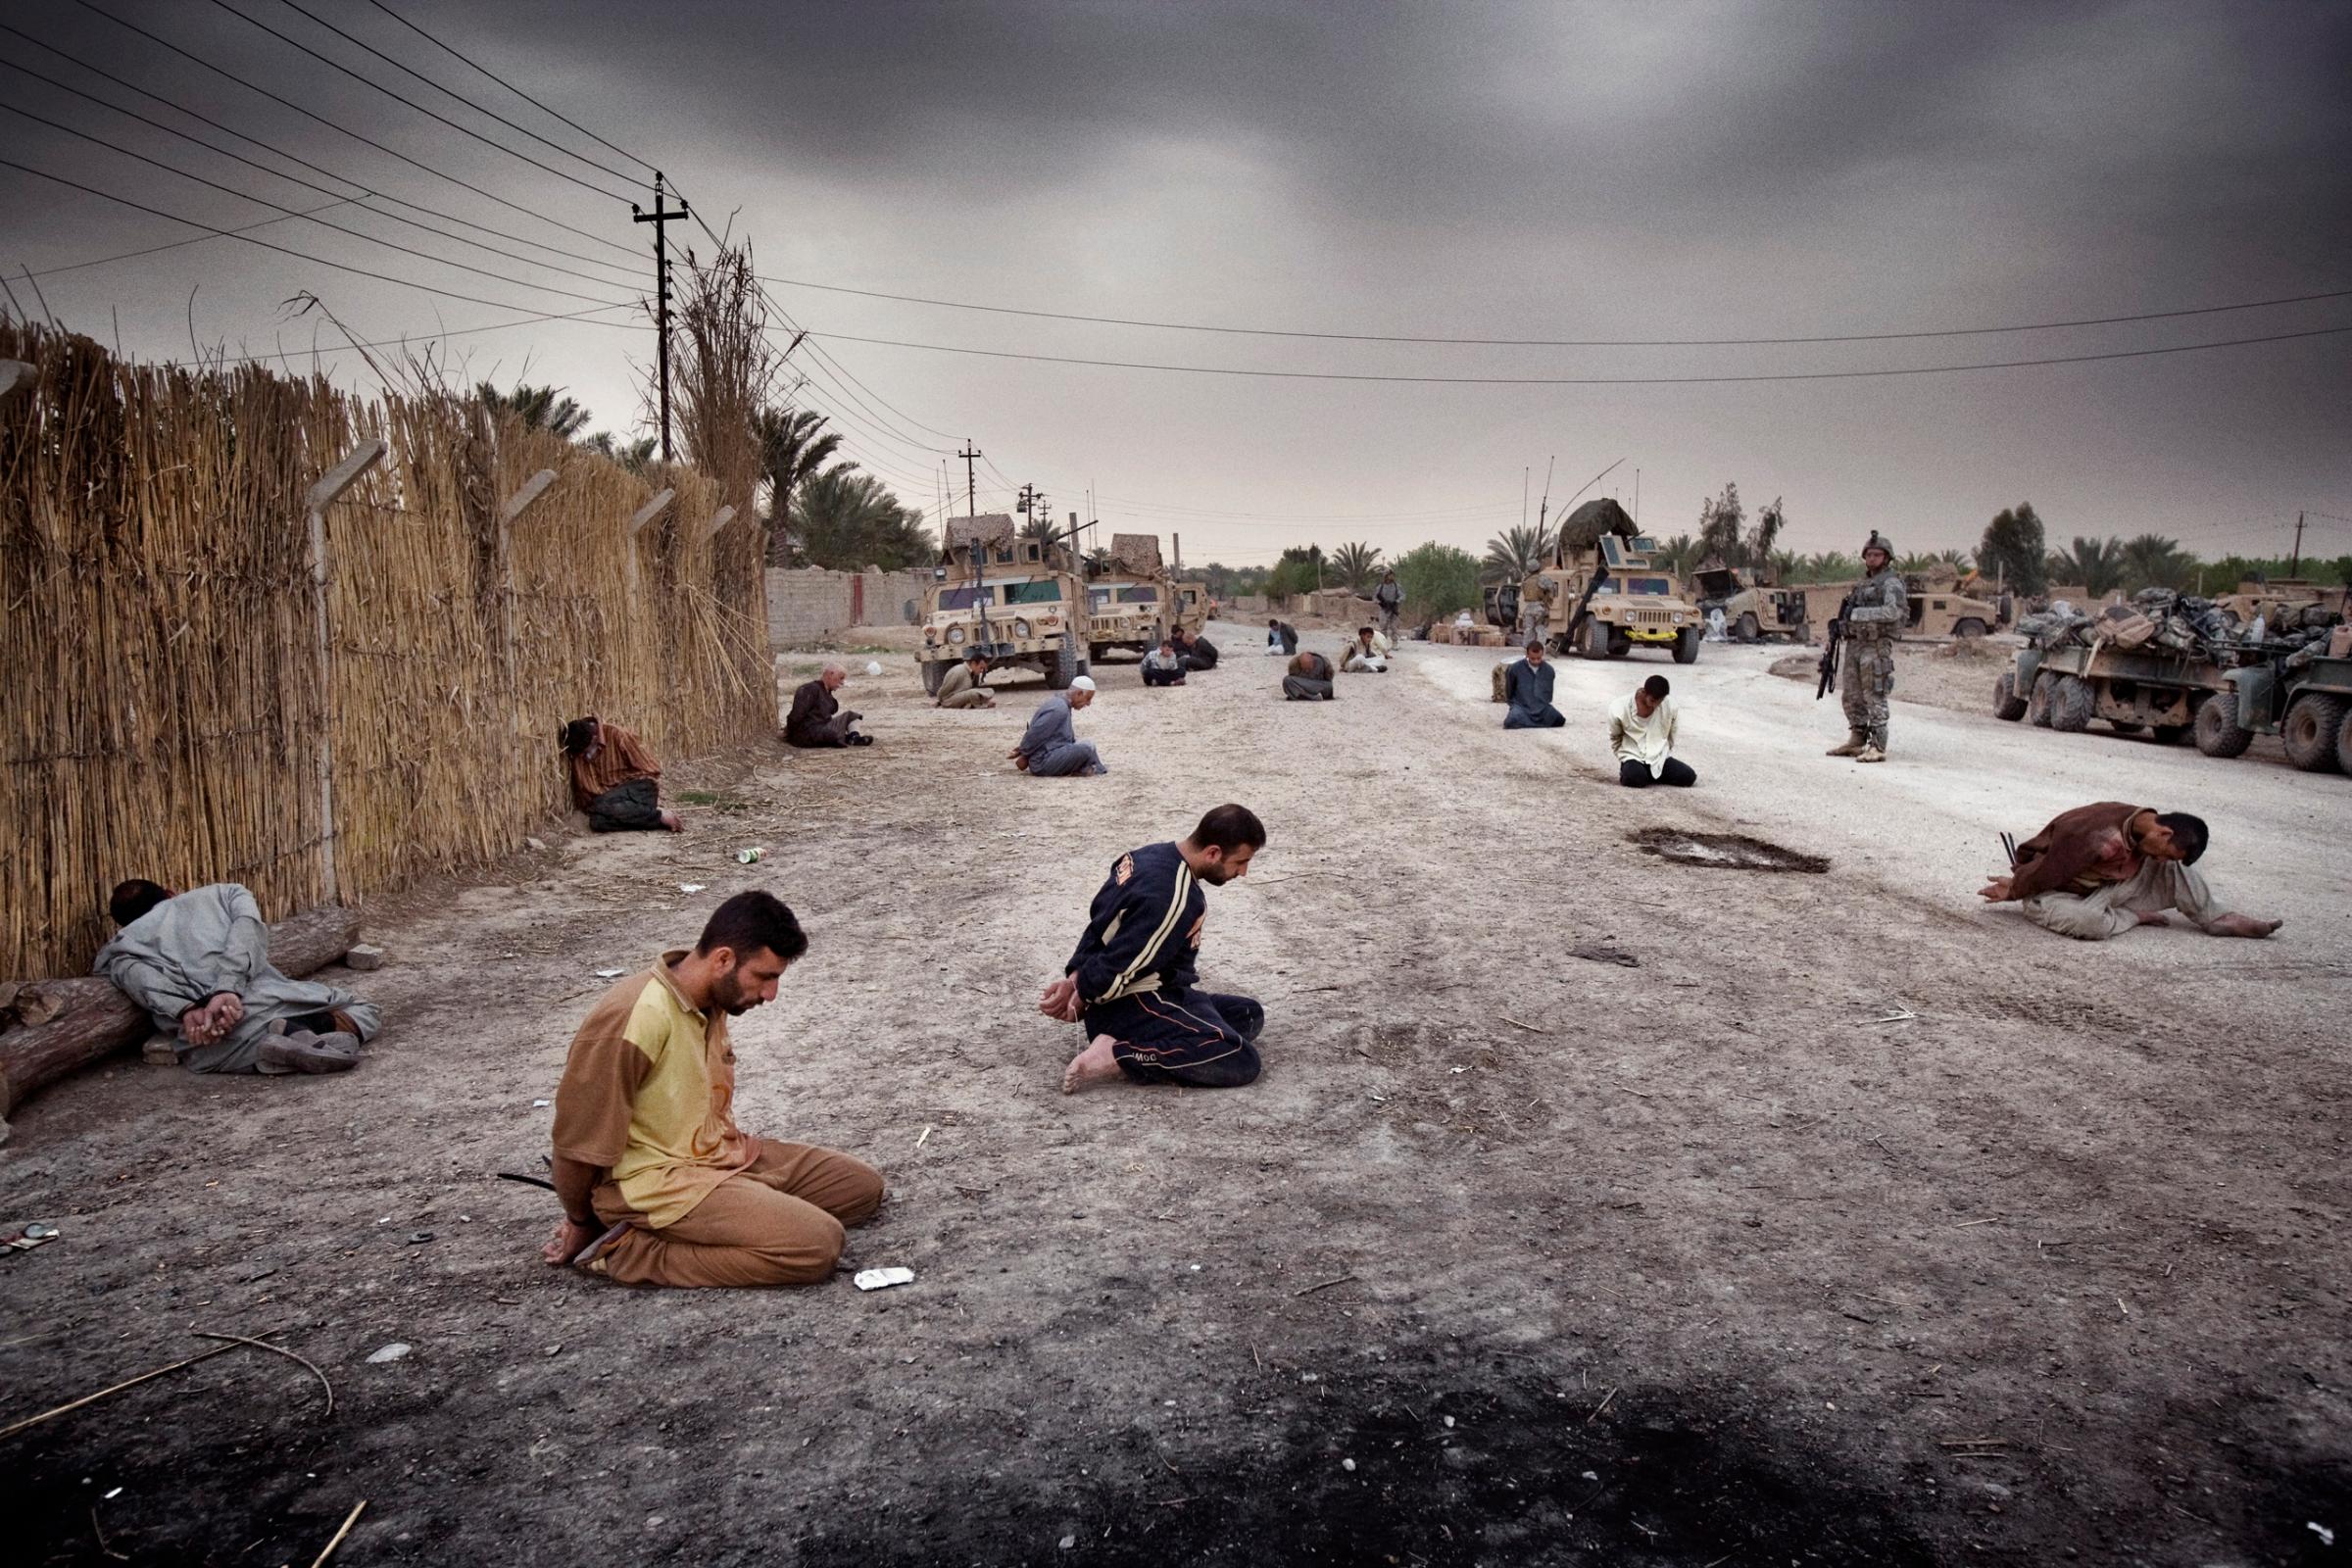 Men arrested by U.S. forces sit bound in the street after a roadside bomb attack in Qubah, Iraq, that left four Americans and one Iraqi boy dead, March 25, 2007.